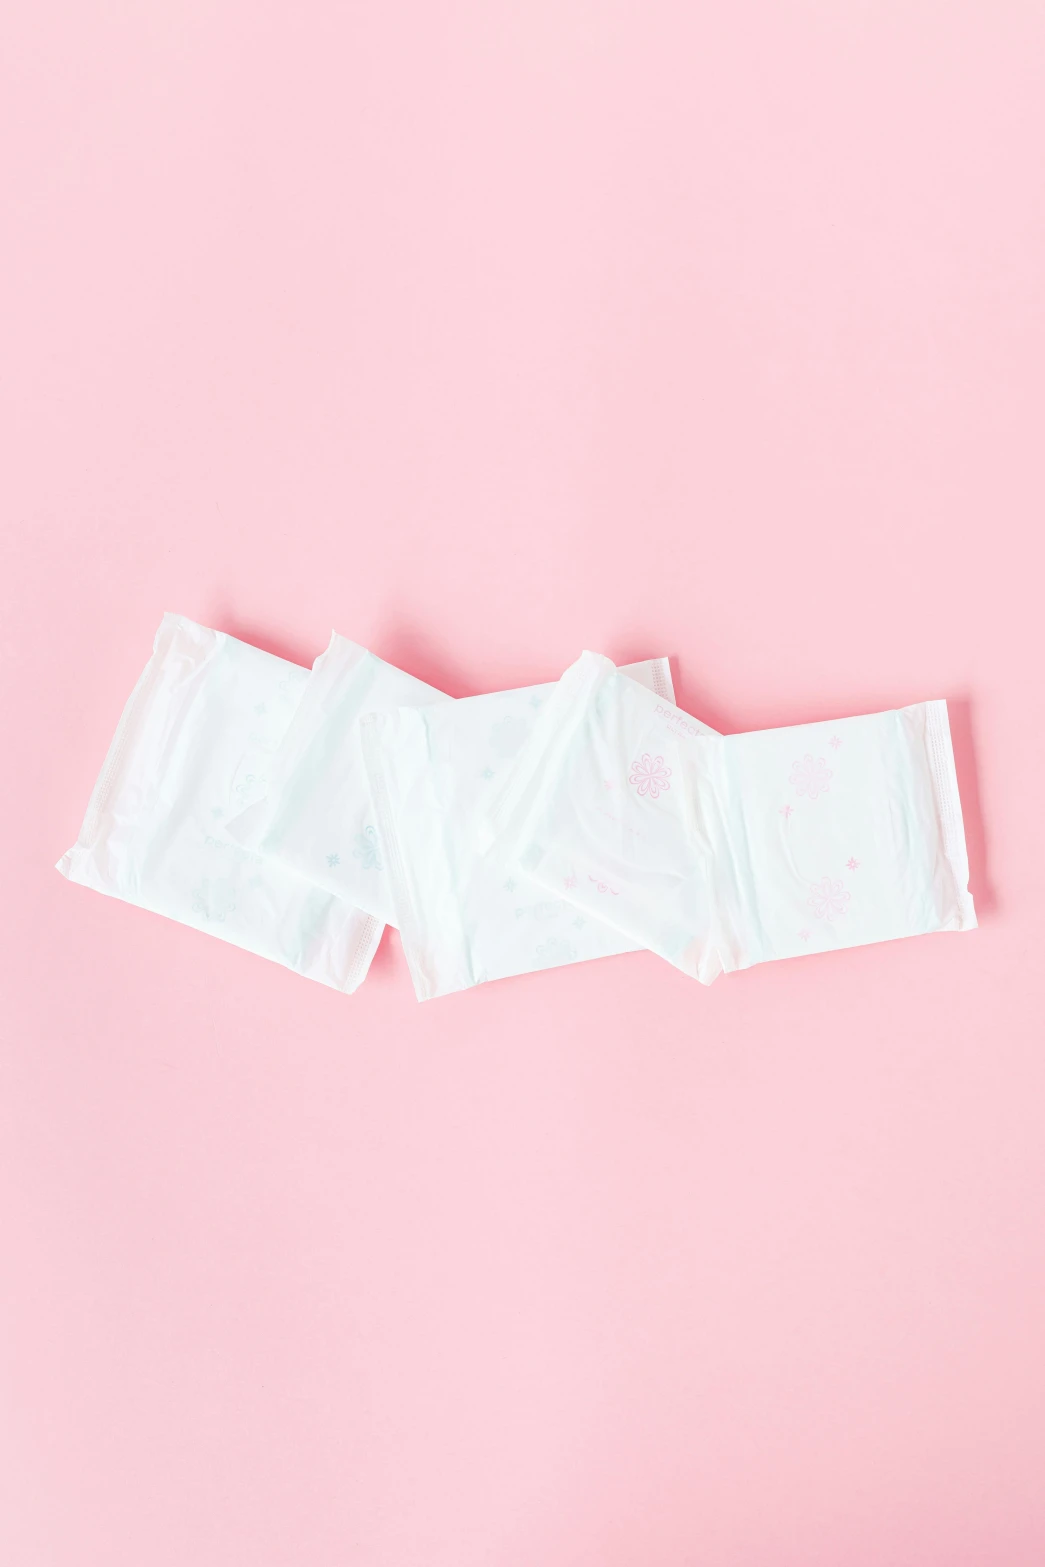 a pair of underwear sitting on top of a pink surface, contracept, profile image, stacked image, folded